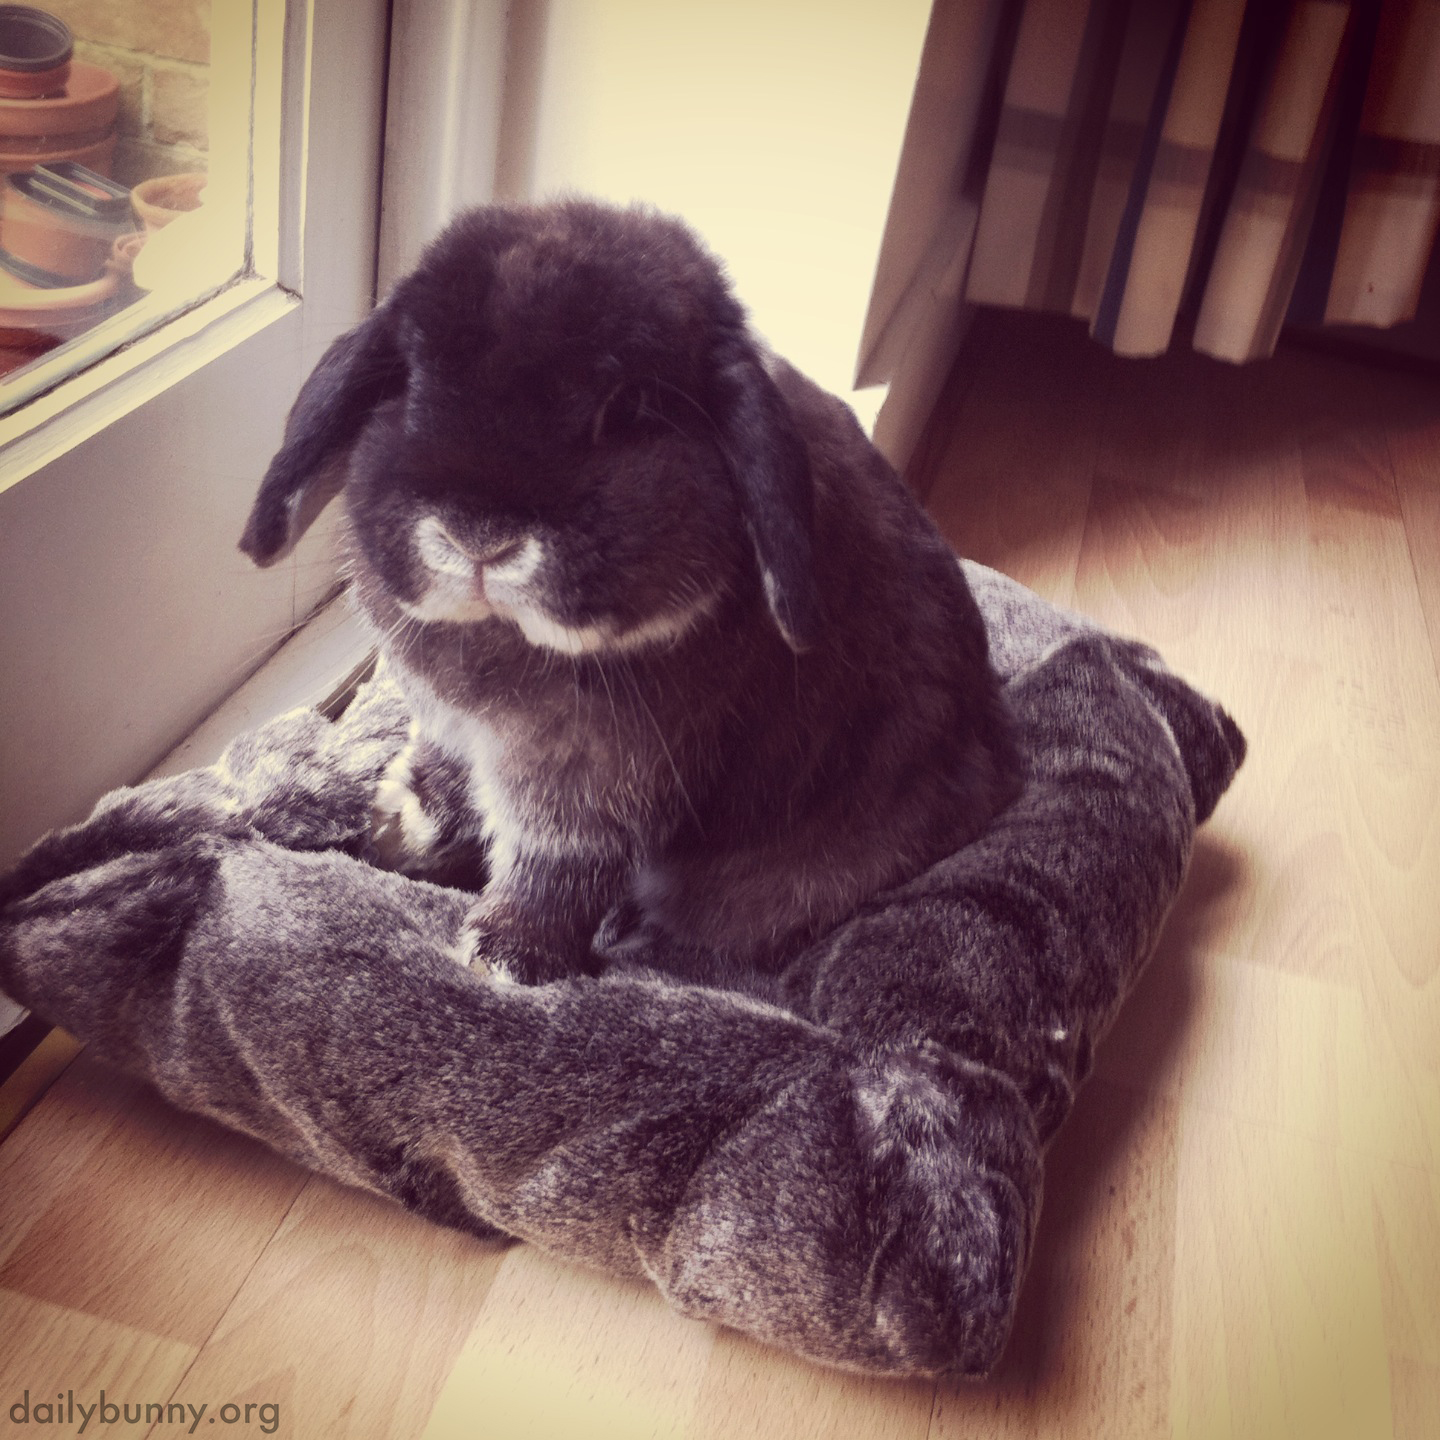 Bunny Likes to Match His Bedding with His Fur